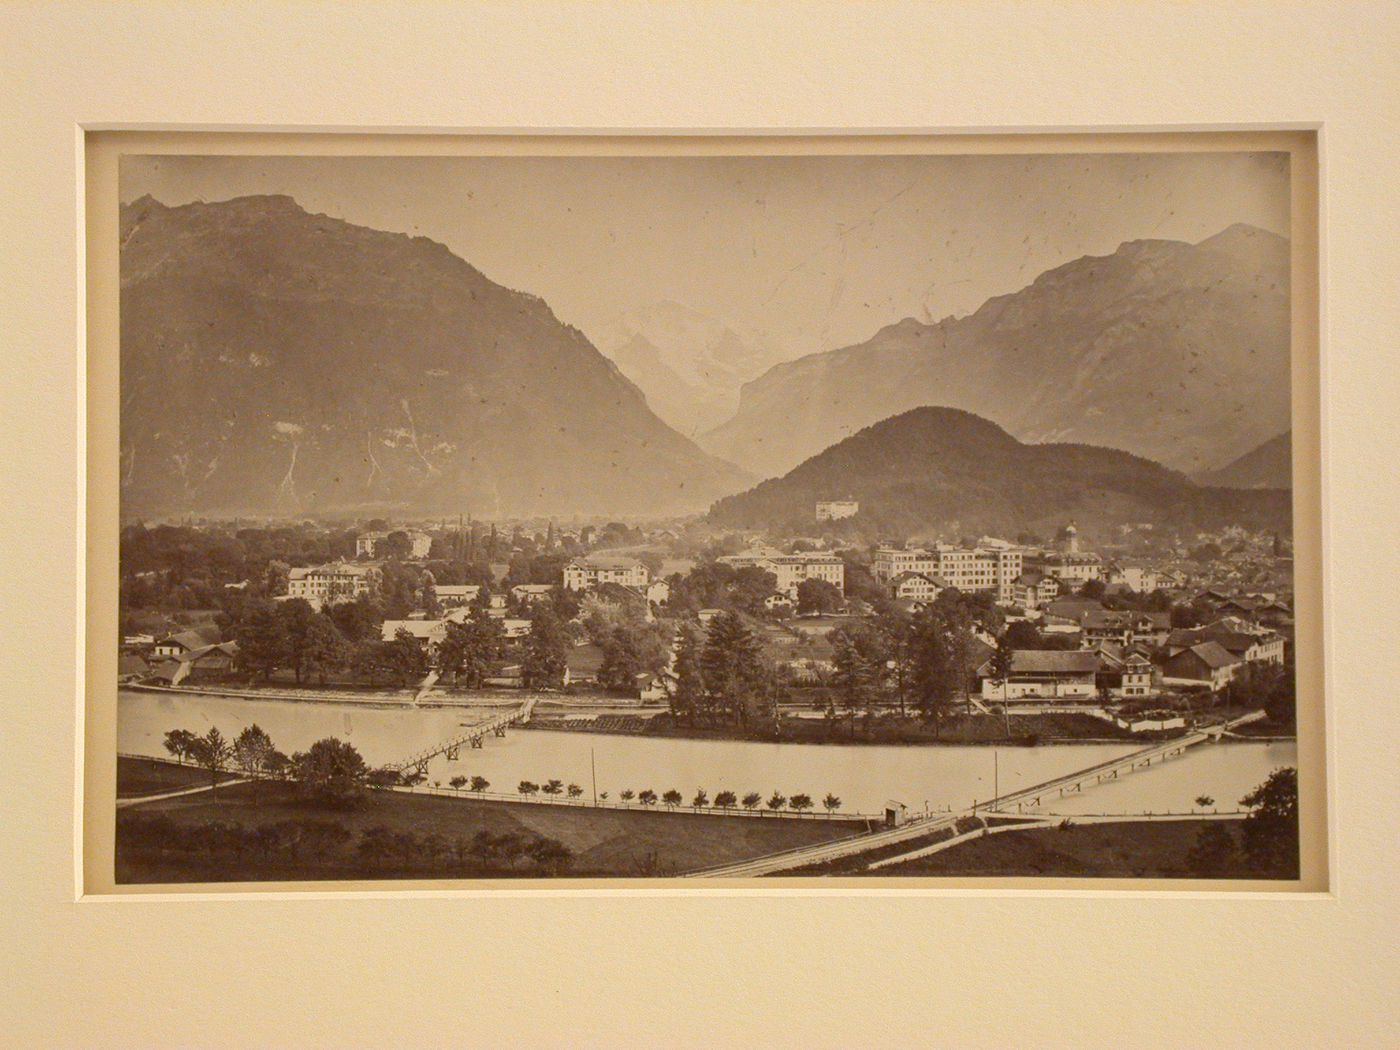 General view of town and valley, from elevated view point, Interlaken, Switzerland